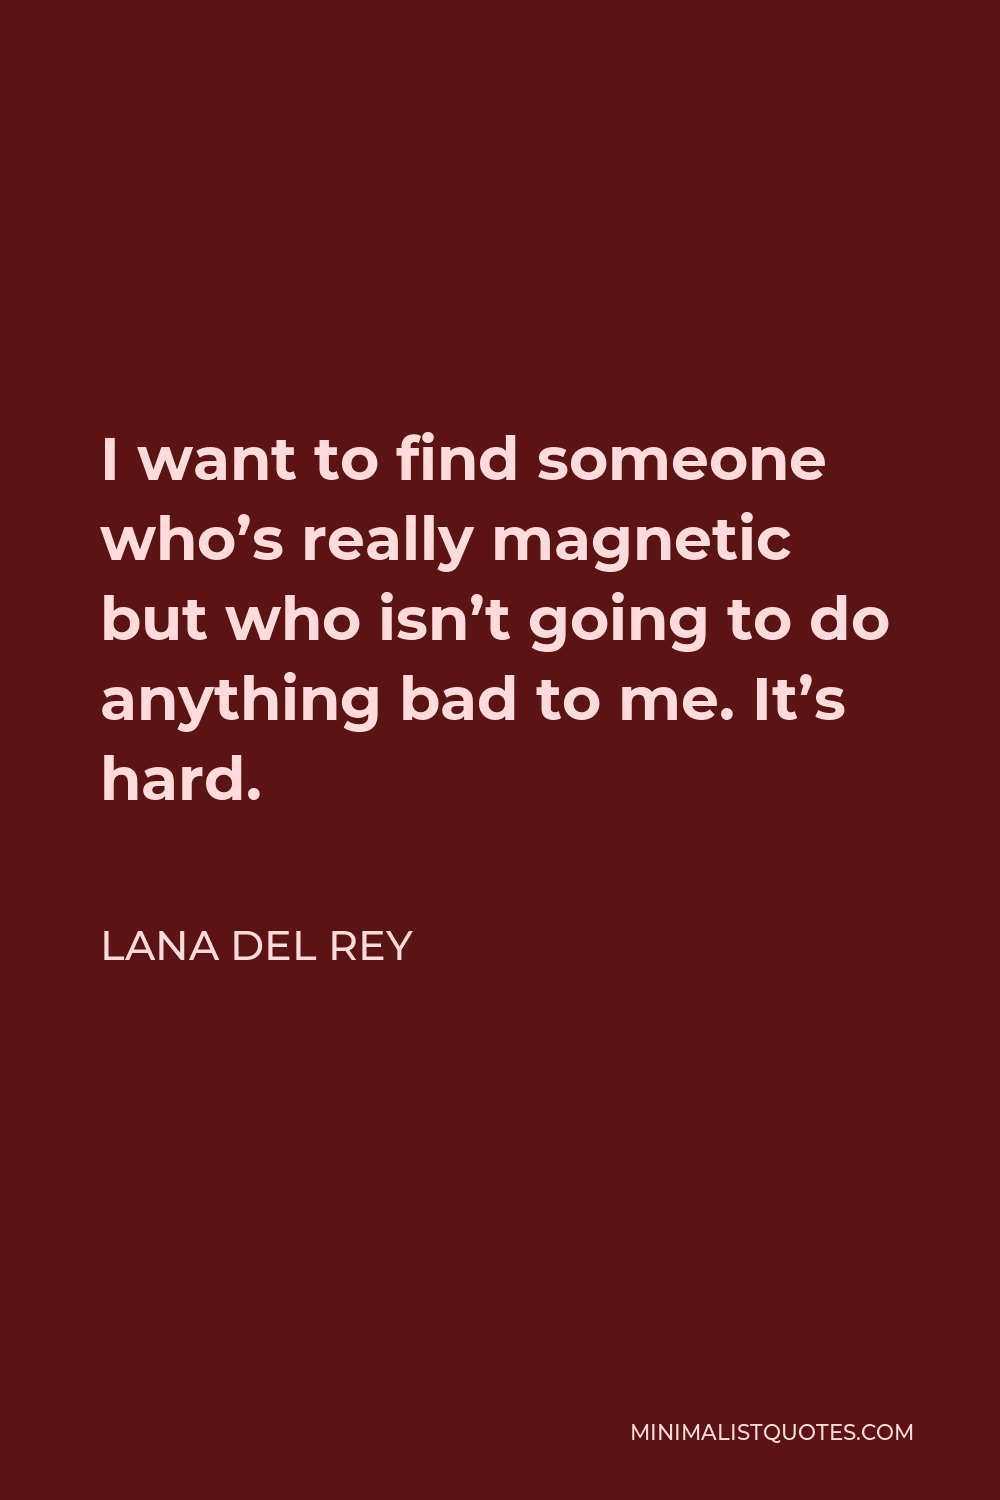 Lana Del Rey Quote - I want to find someone who’s really magnetic but who isn’t going to do anything bad to me. It’s hard.